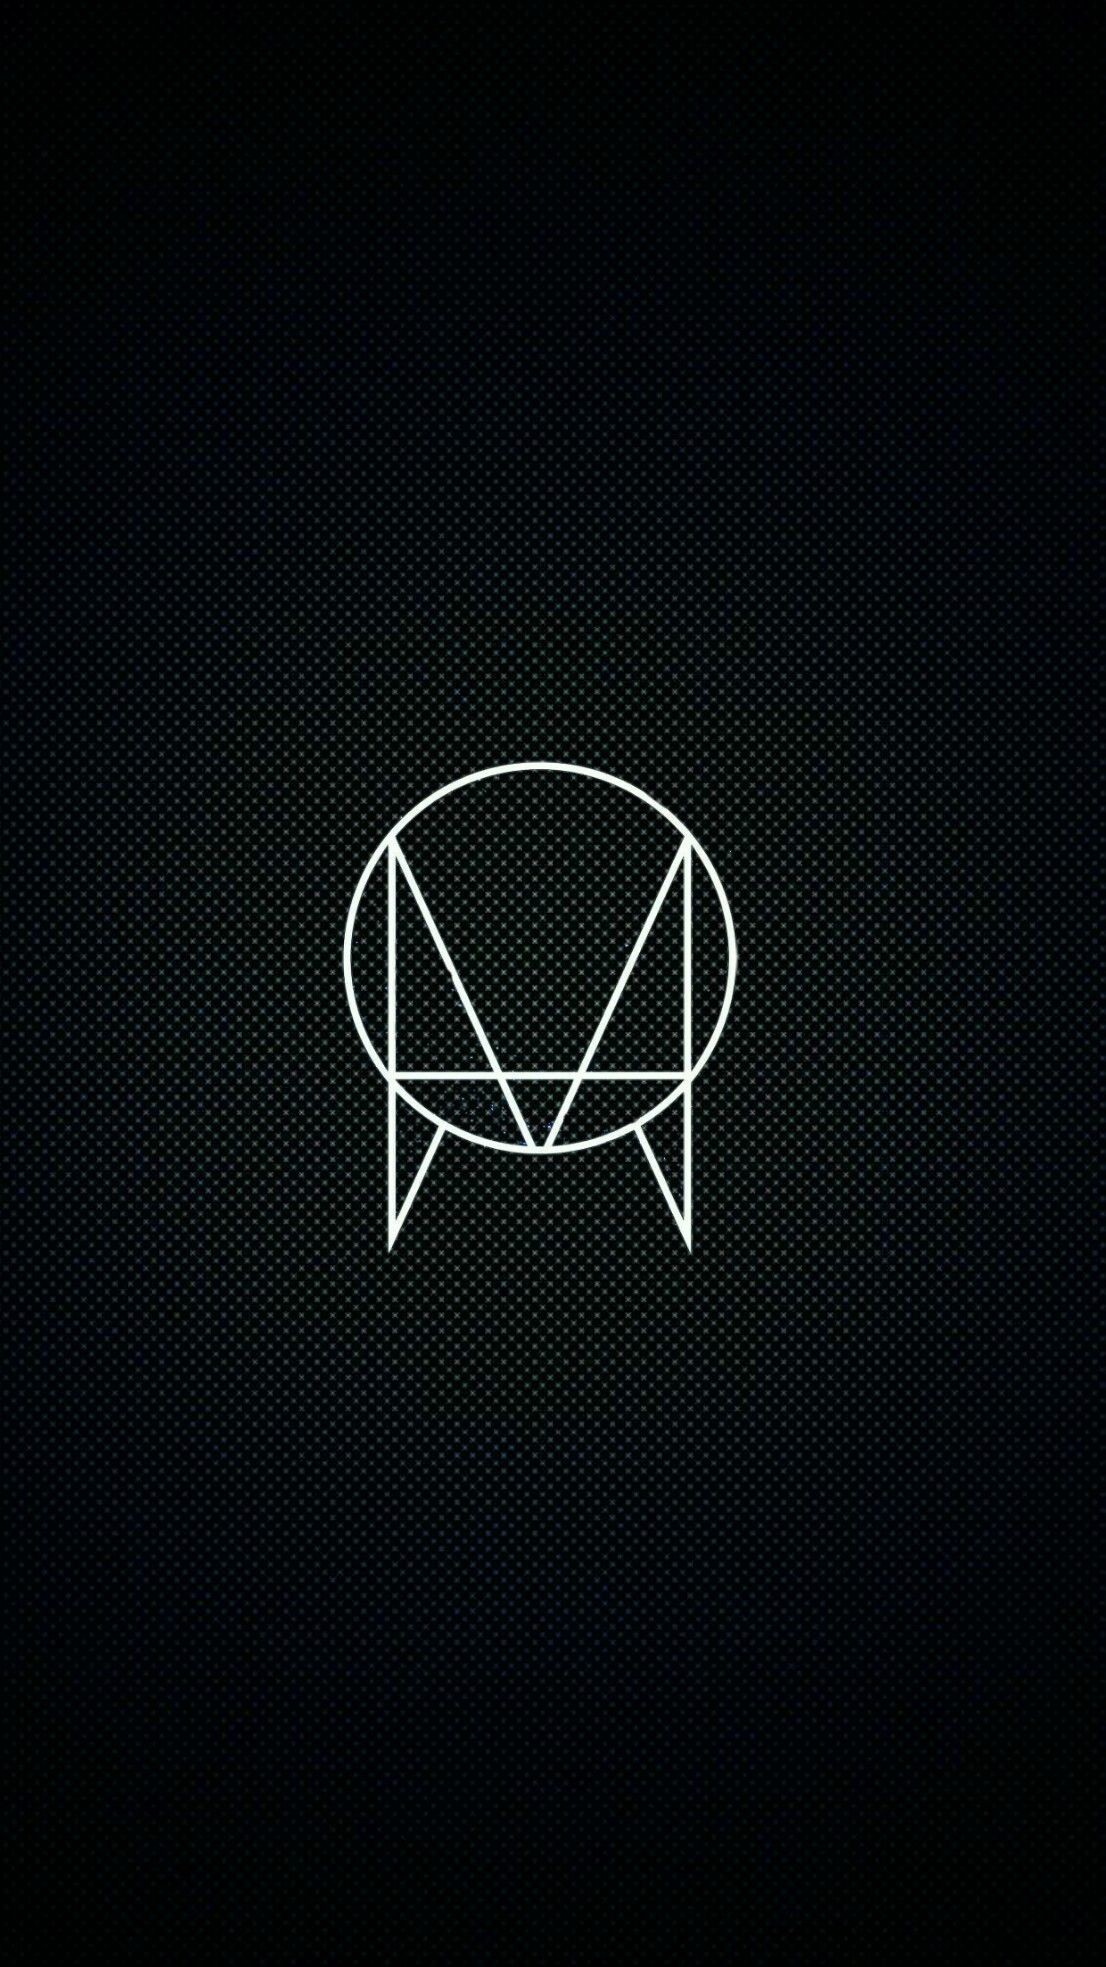 1106x1967 Owsla with carbon fiber Dubstep, Gorillaz, Wallpapers Android, Wallpaper  Designs, Edm,